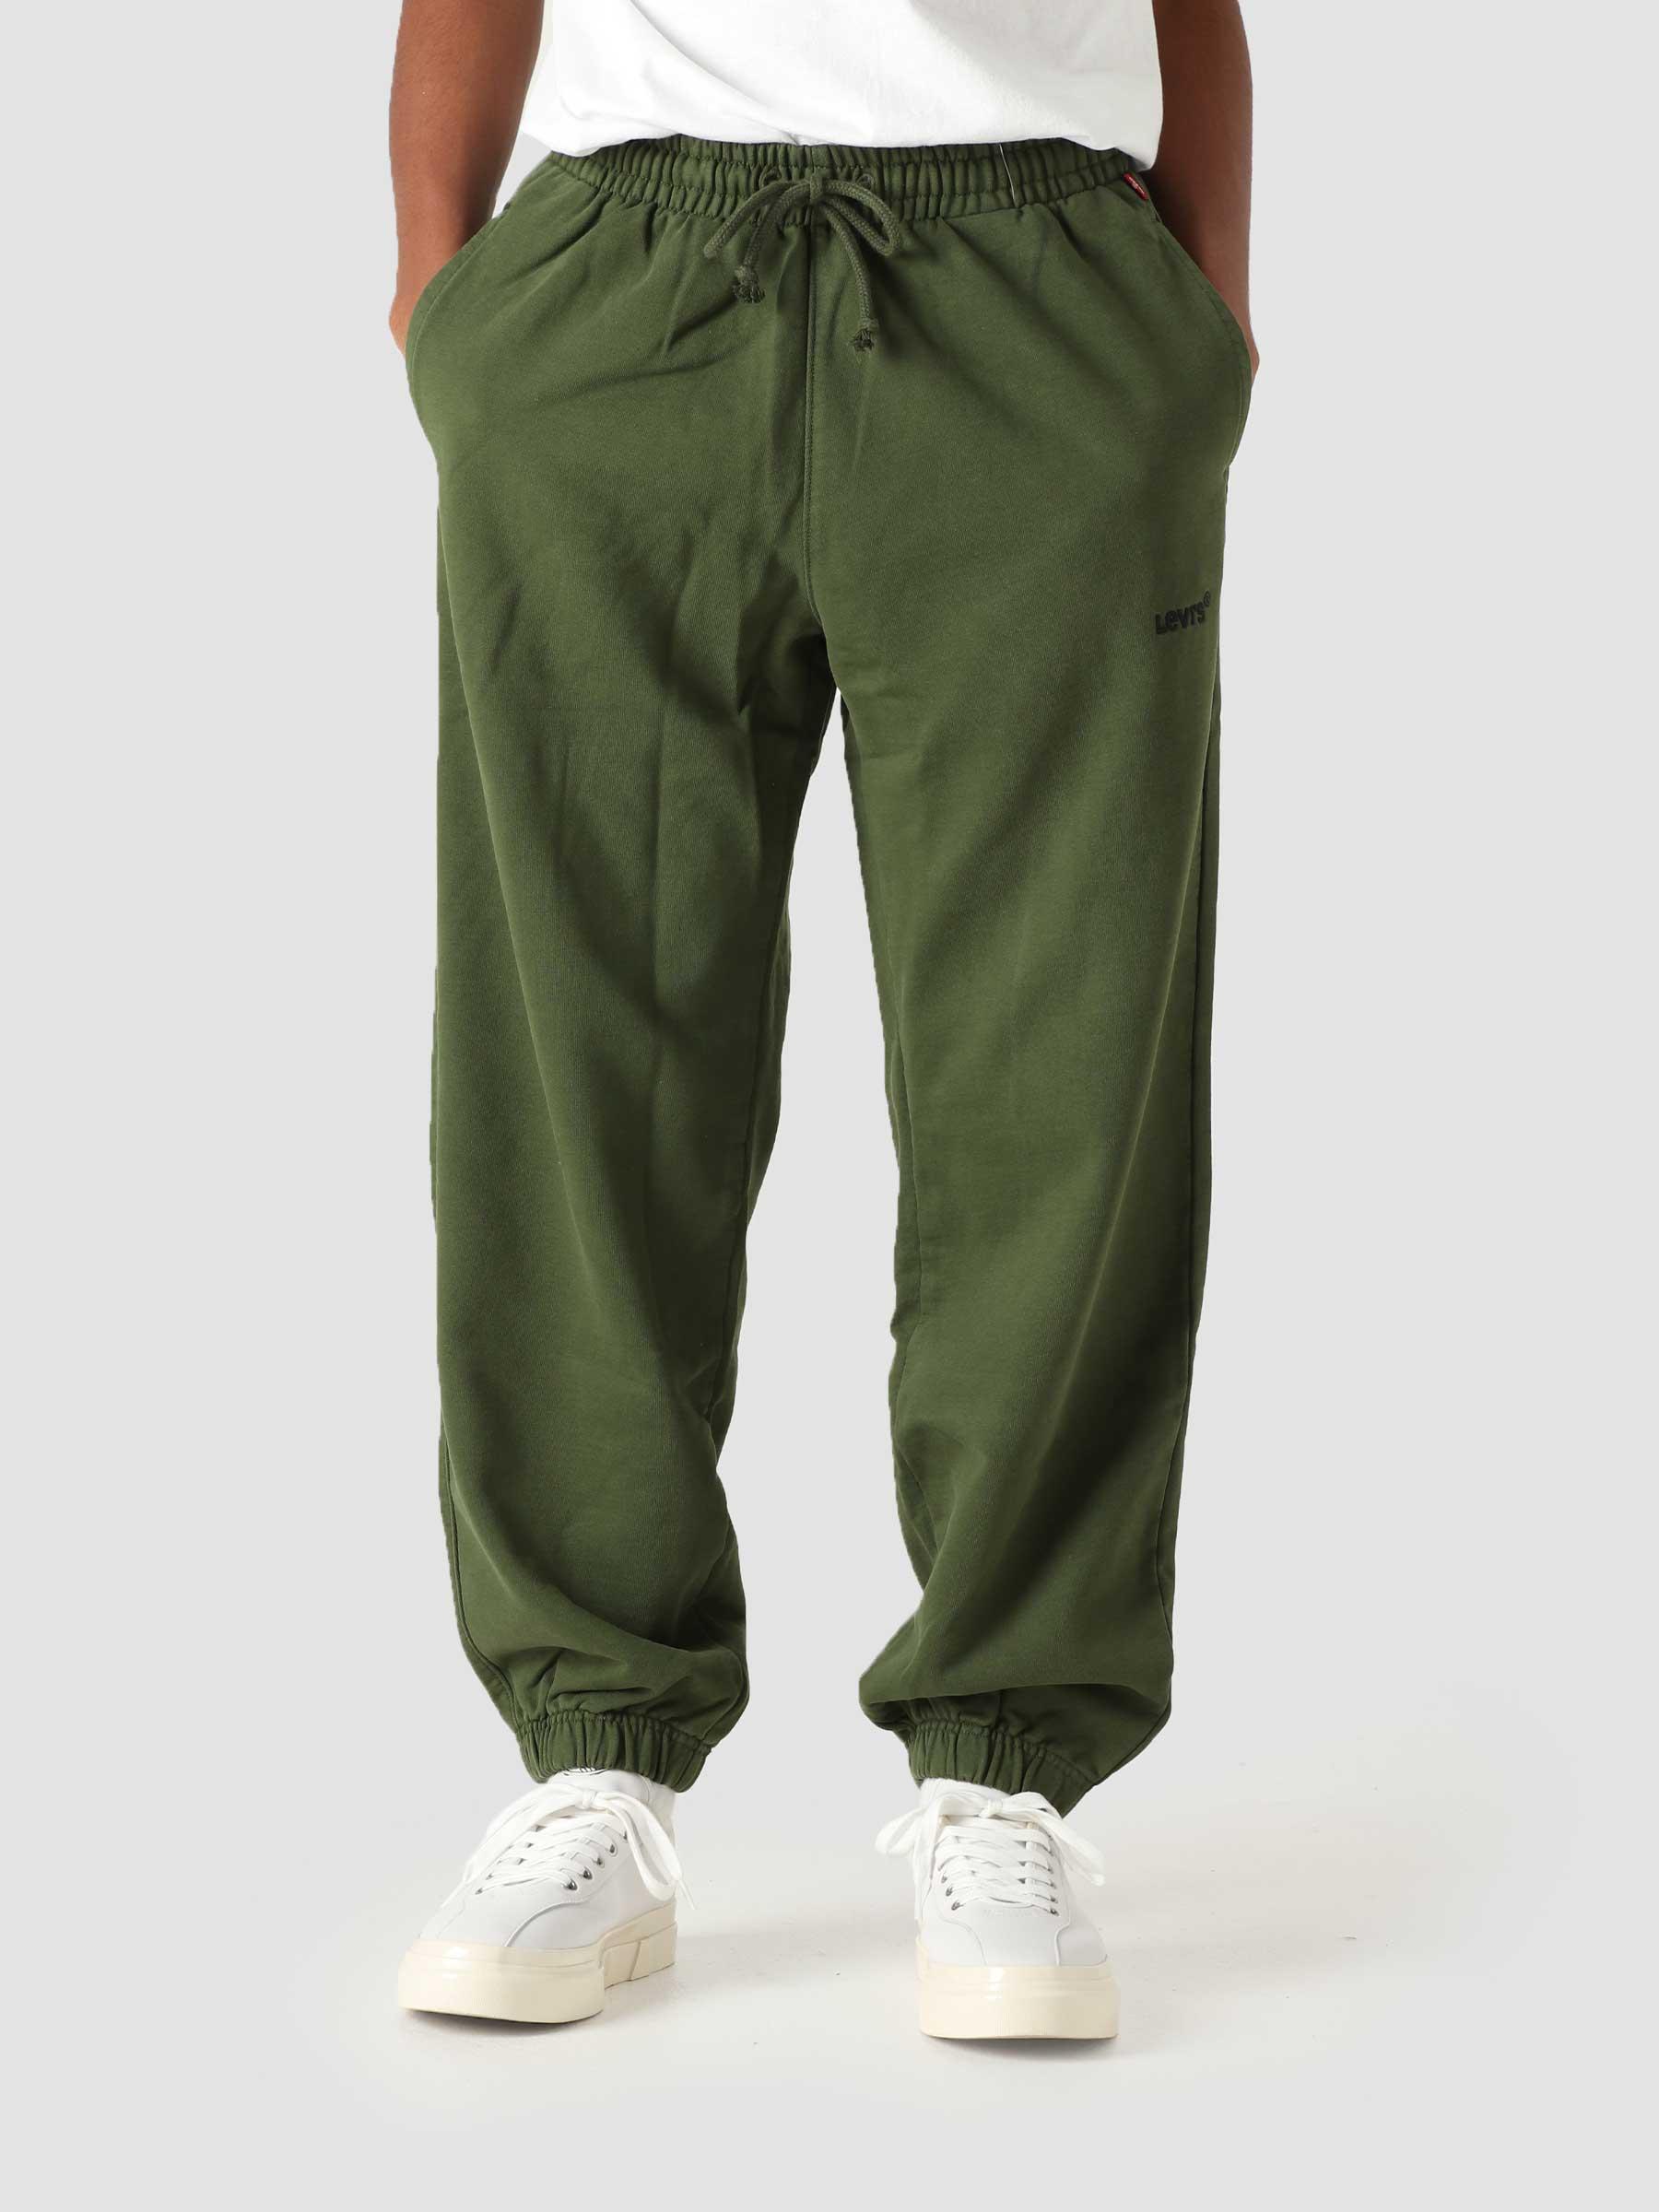 Red Tab Sweatpant Mossy Green A0767-0021